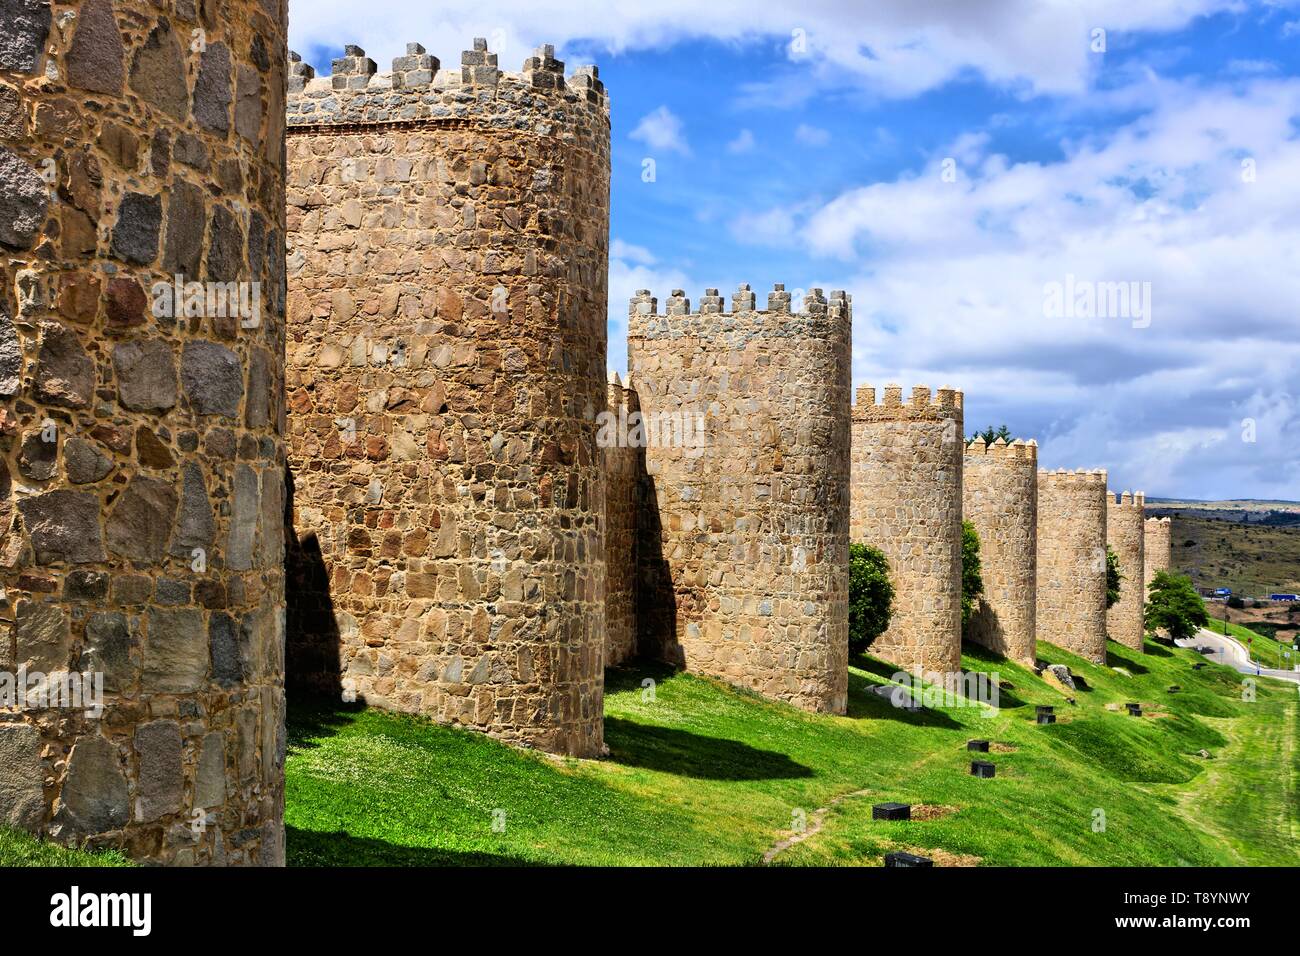 Mighty medieval wall and towers surrounding the old town of Avila, Spain Stock Photo